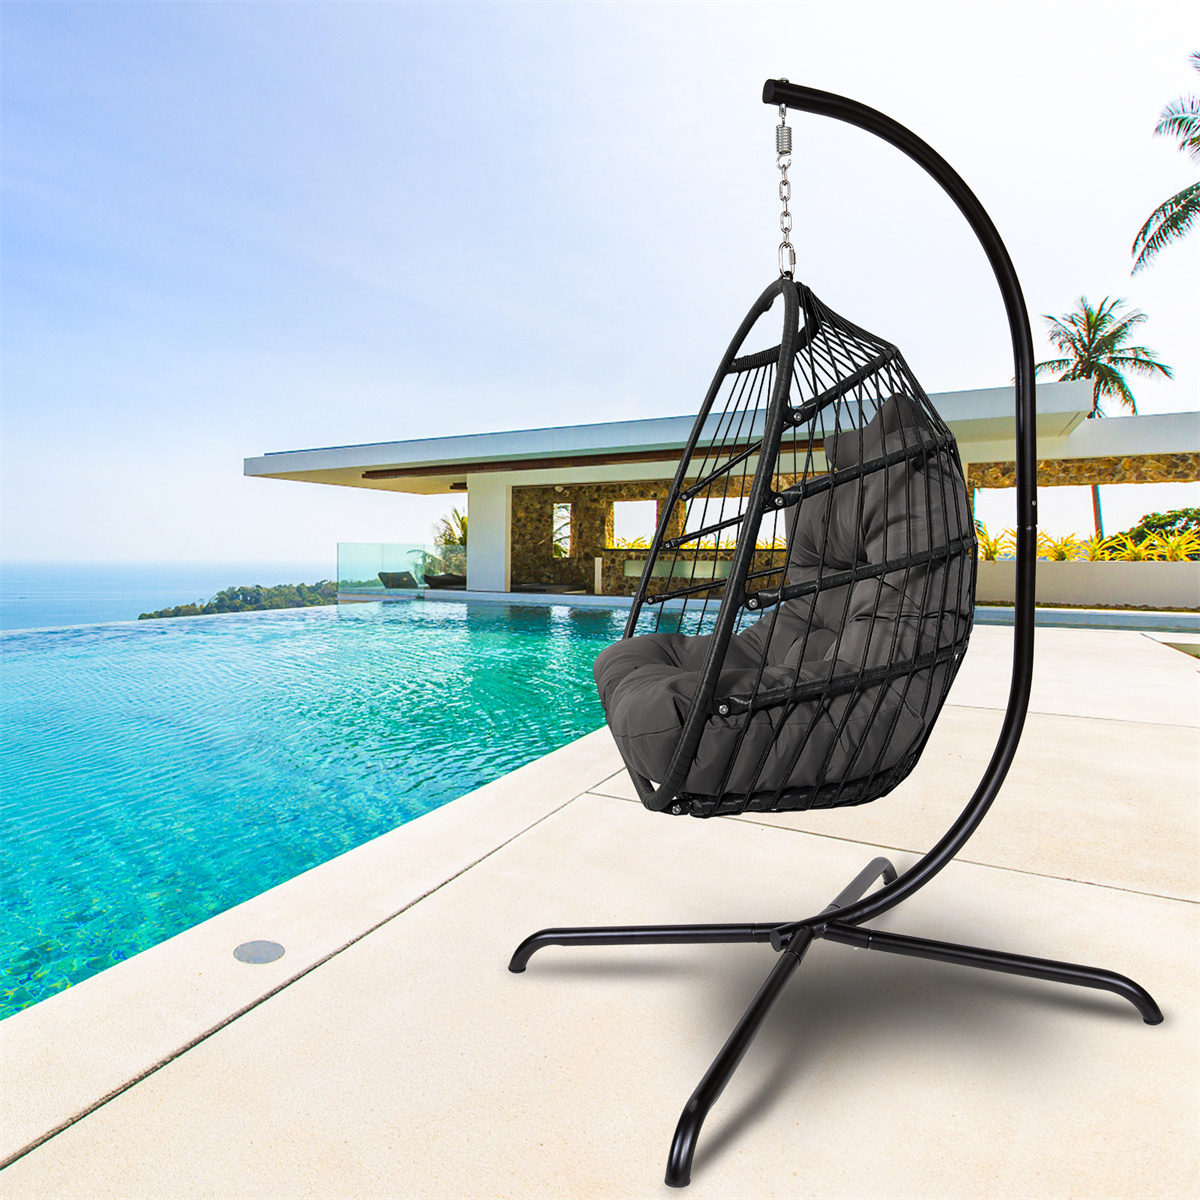 ARCTICSCORPION Black Swing Egg Chair with Stand, Indoor Outdoor Wicker Rattan Patio Basket Hanging Chair with C Type Bracket, Hammock Chair with Cushion and Pillow, Wicker Folding Hanging Chair - image 2 of 7